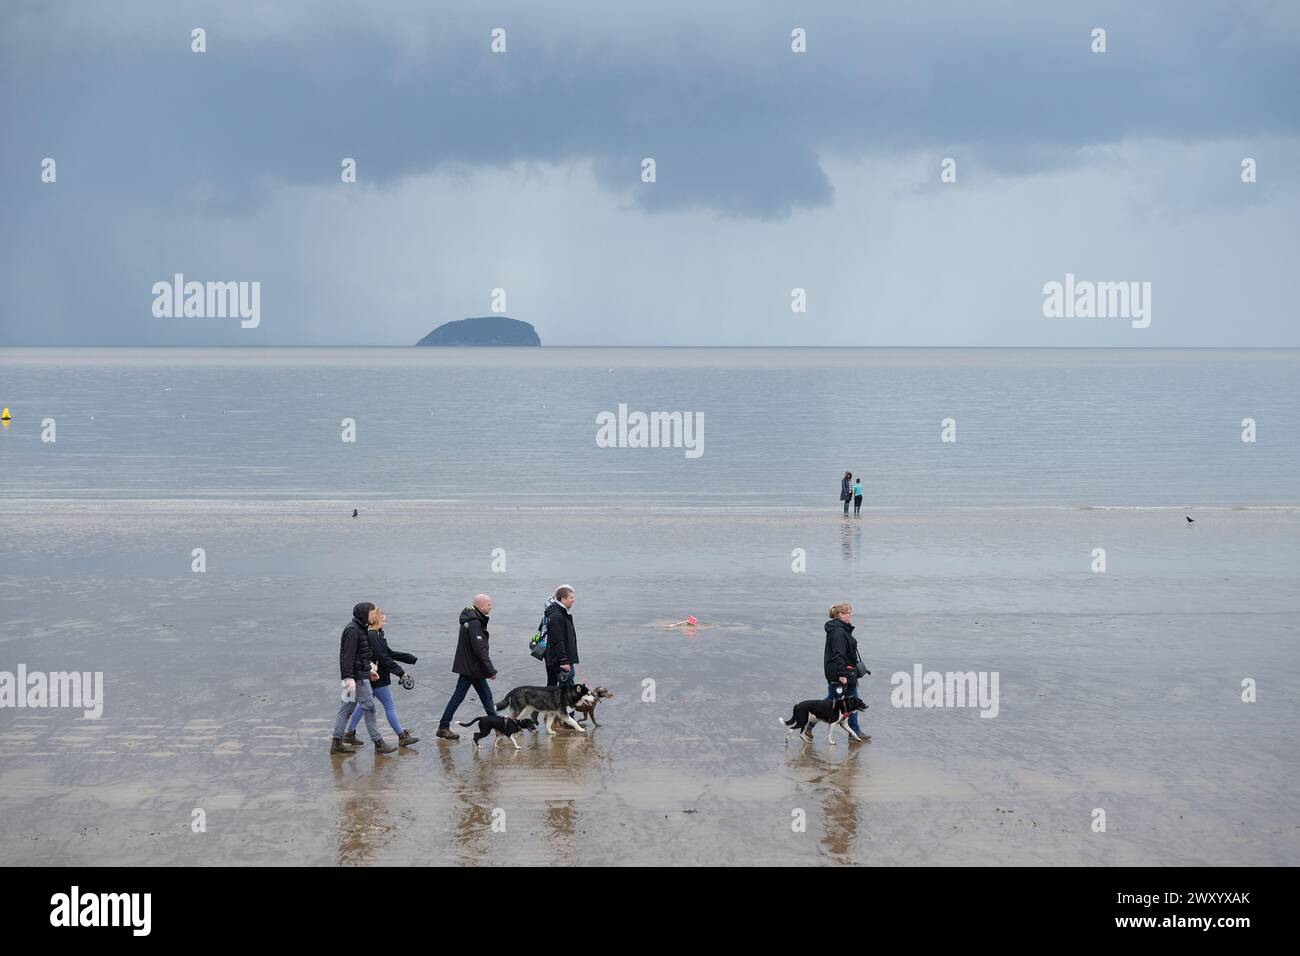 Two people walking their dog on a cold, wet, windy, rainy beach. Stock Photo